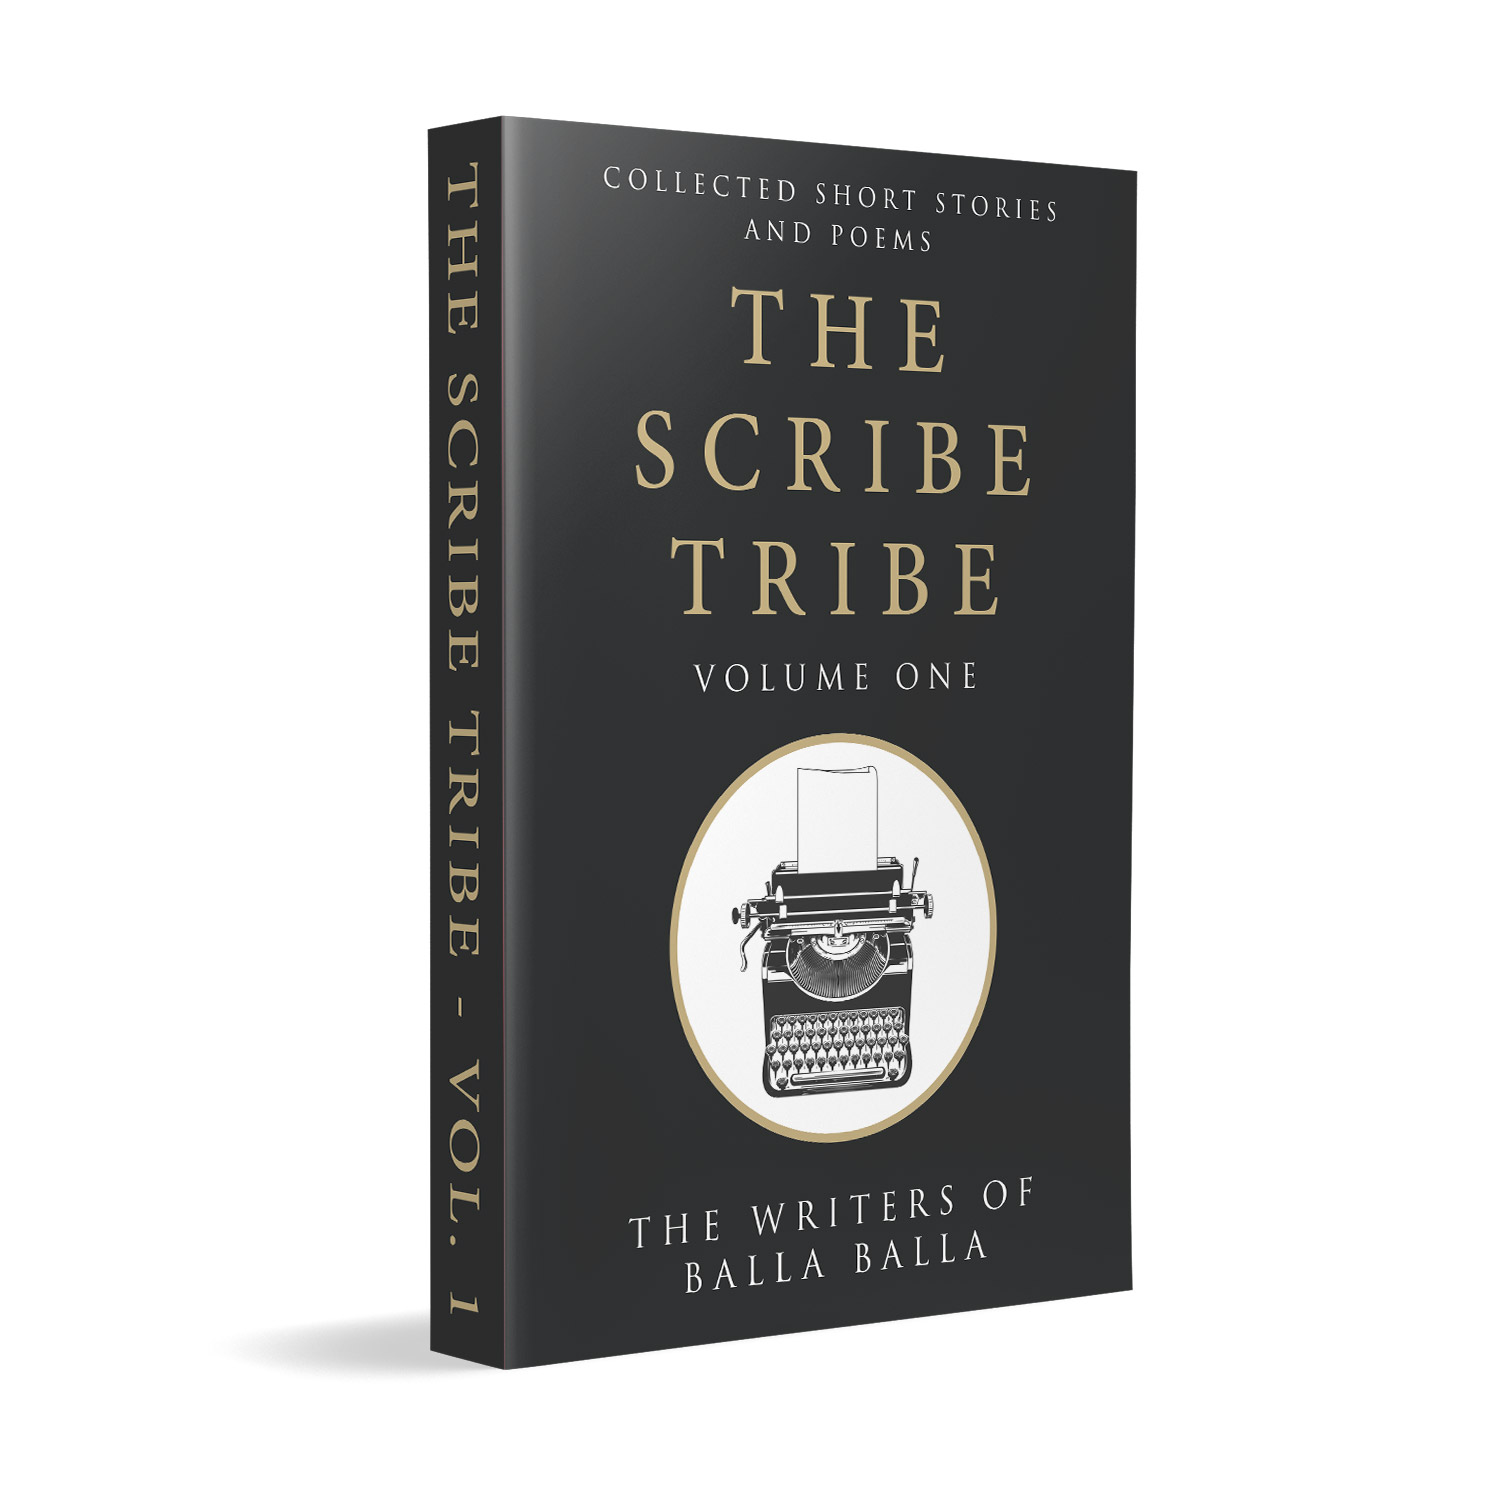 'The Scribe Tribe' is a compendium of short stories by an Australian Writing Group. The cover design and interior manuscript formatting are by Mark Thomas. Learn what Mark could do for your book by visiting coverness.com.